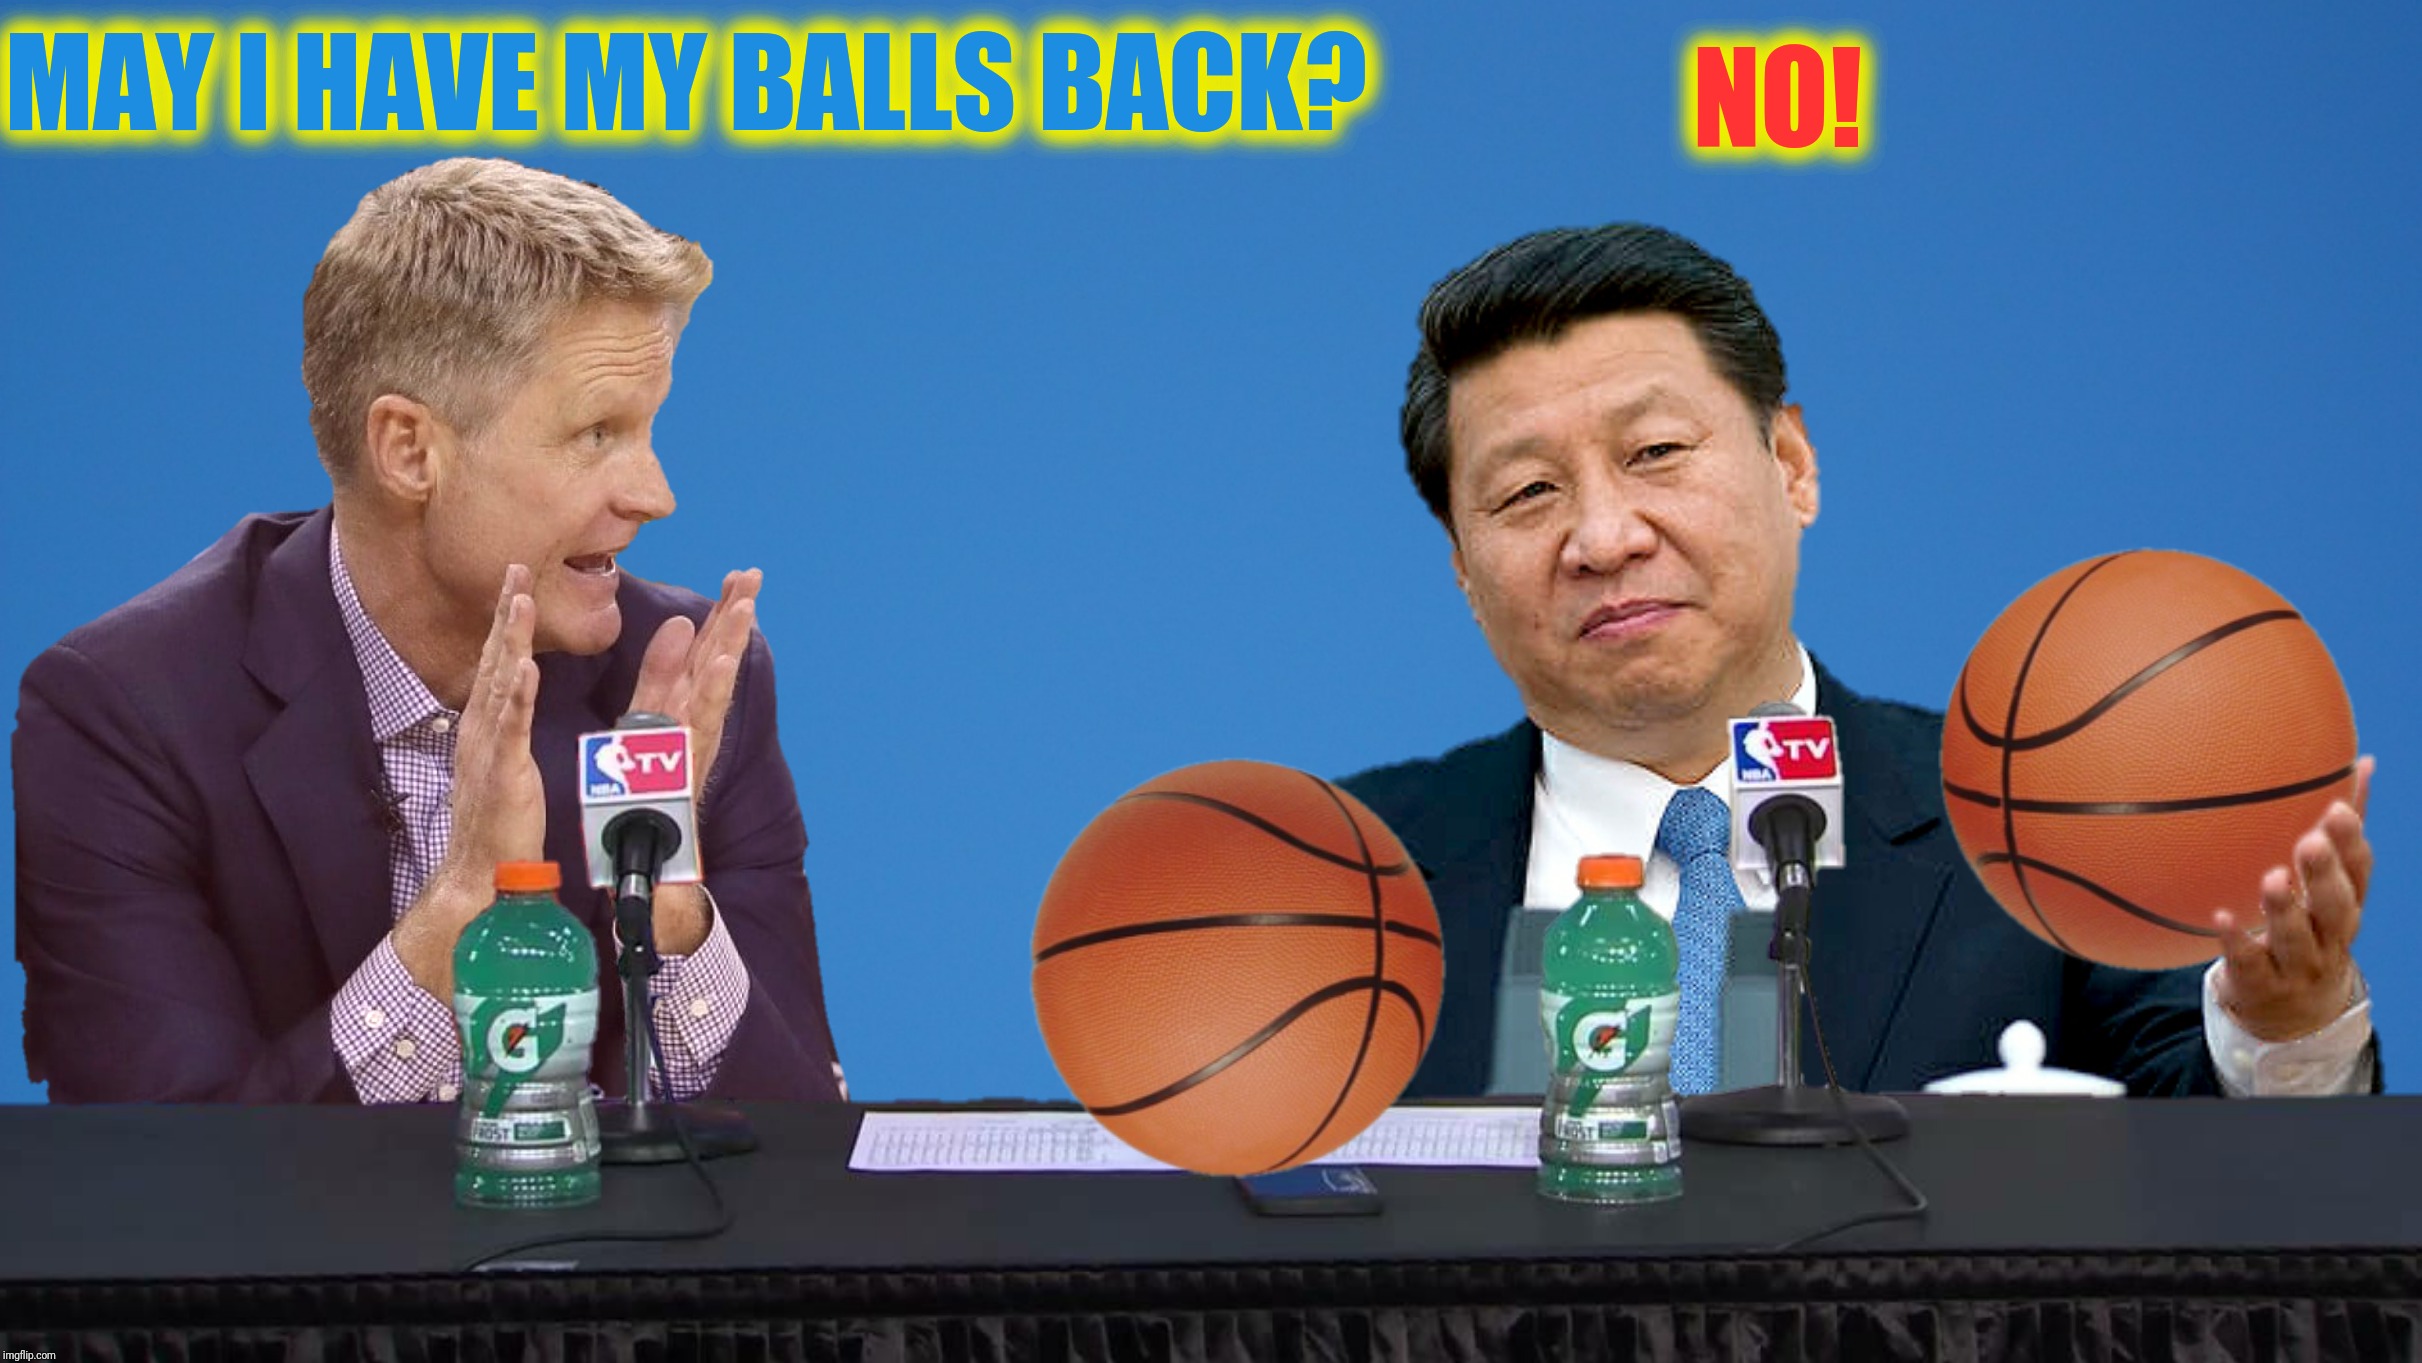 Bad Photoshop Sunday presents:  All you need is money | MAY I HAVE MY BALLS BACK? NO! | image tagged in bad photoshop sunday,steve kerr,xi jinping,basketball | made w/ Imgflip meme maker